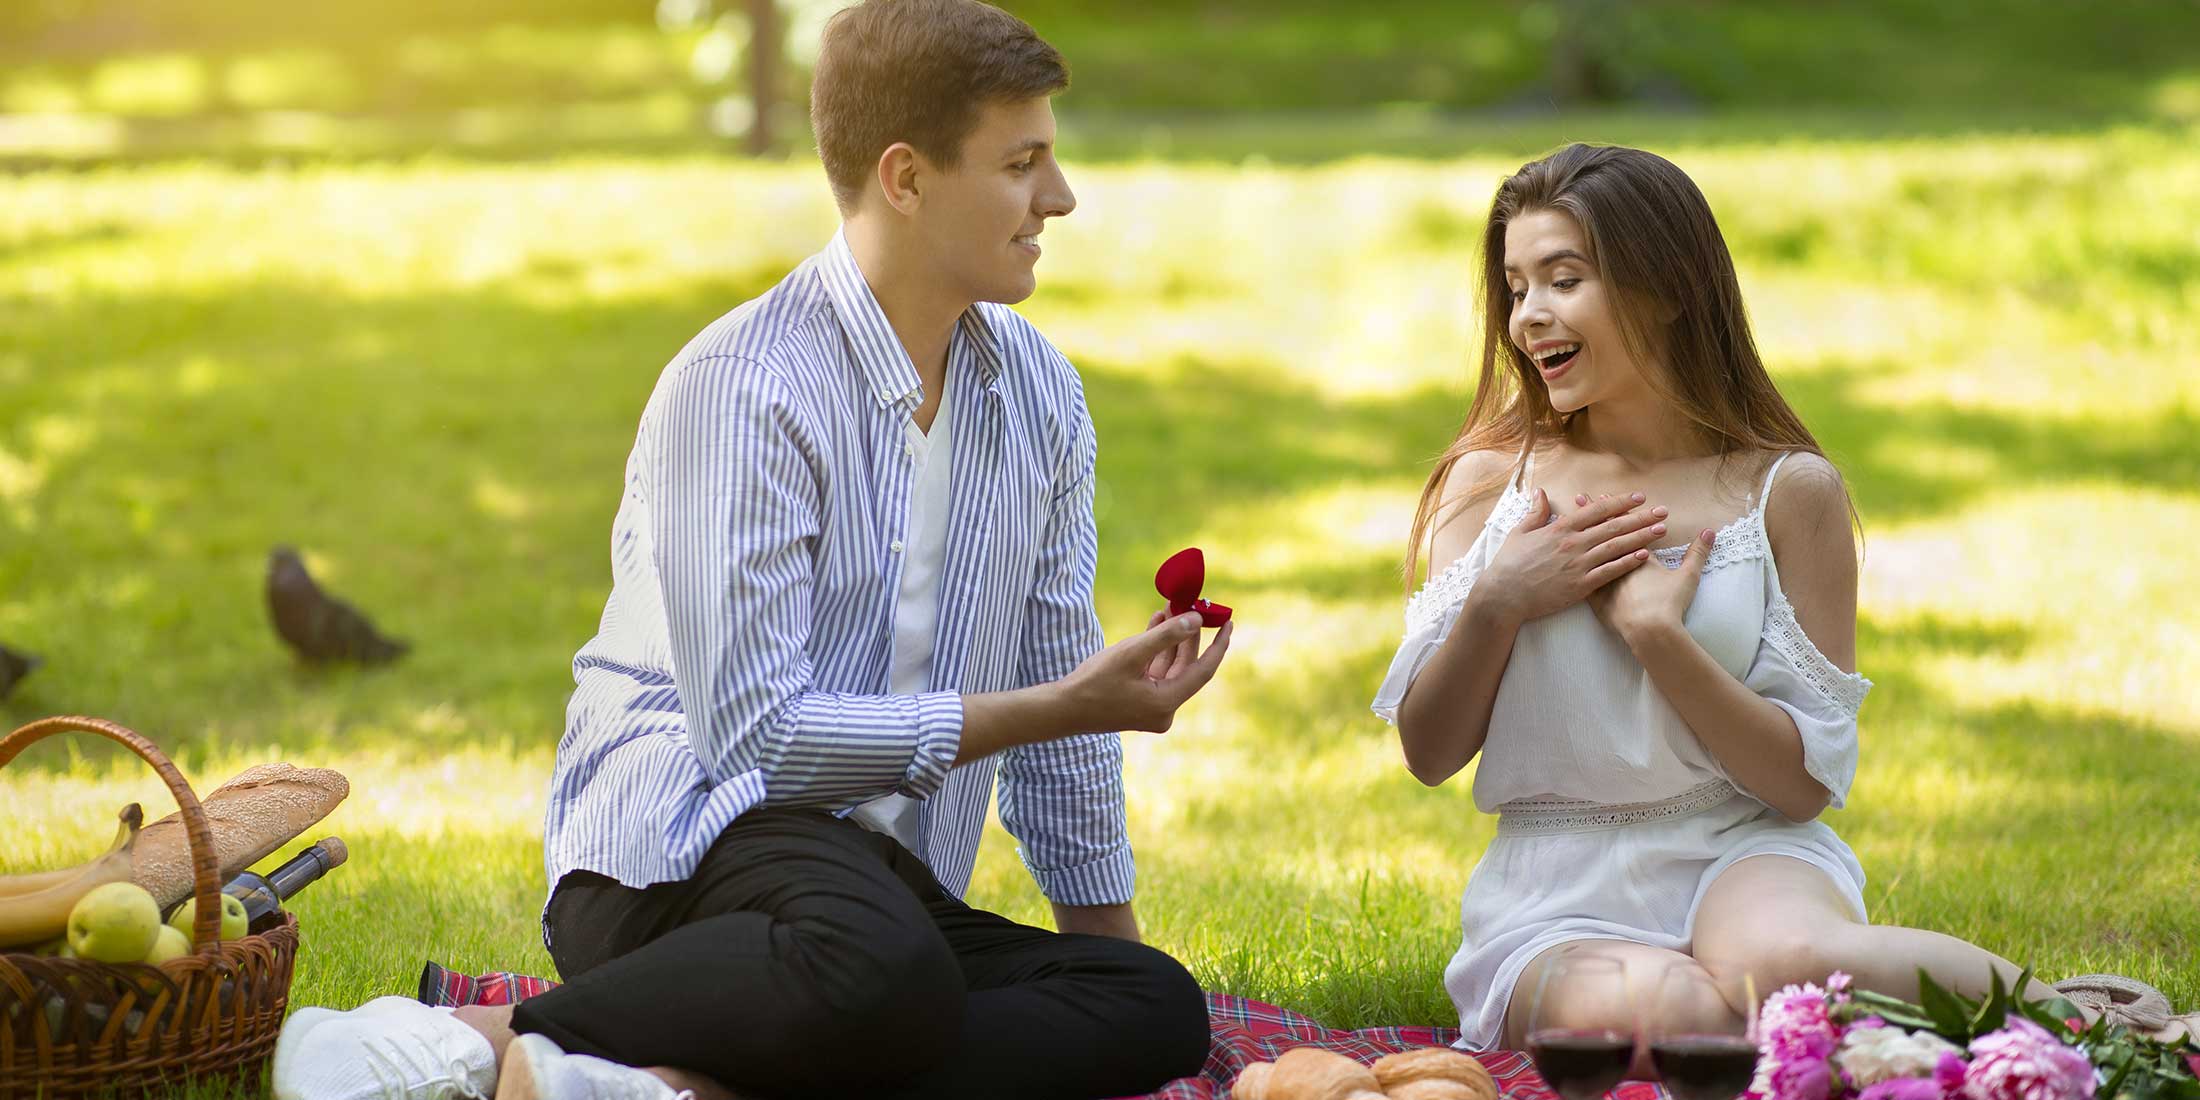 Man proposing to his girlfriend on a picnic